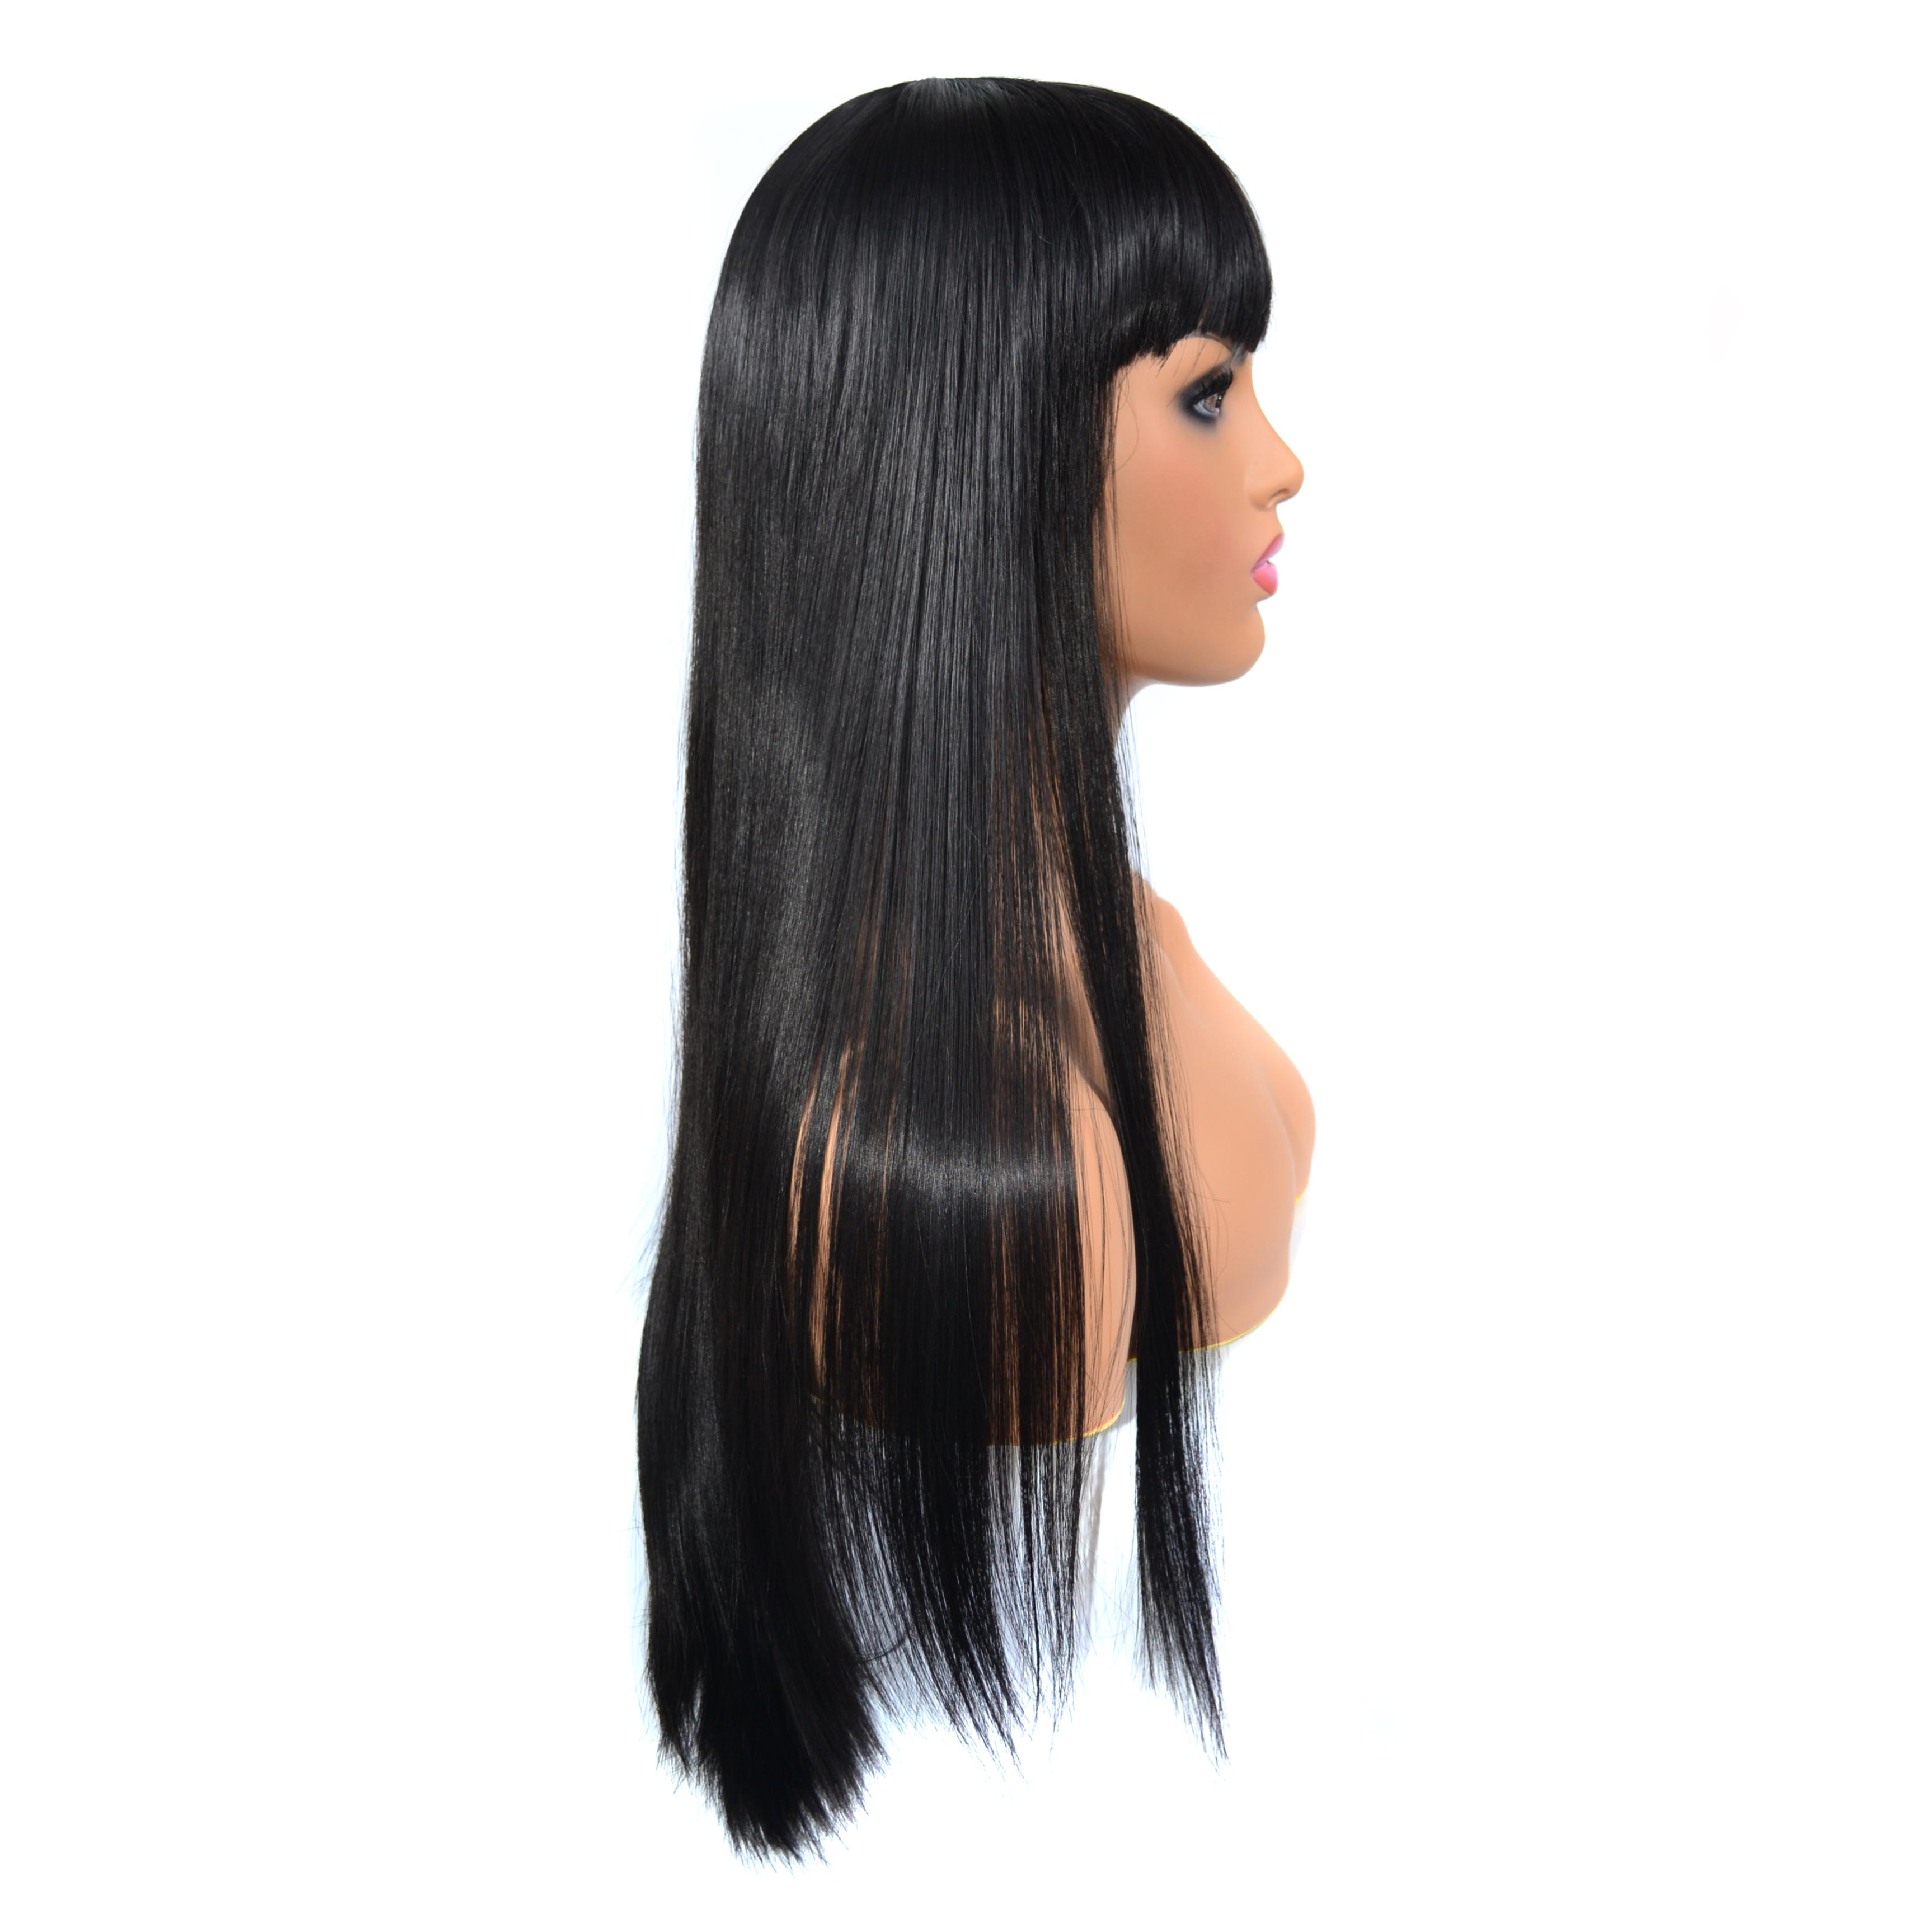 Synthetic Long Straight Hair Wig With Chinese Bangs